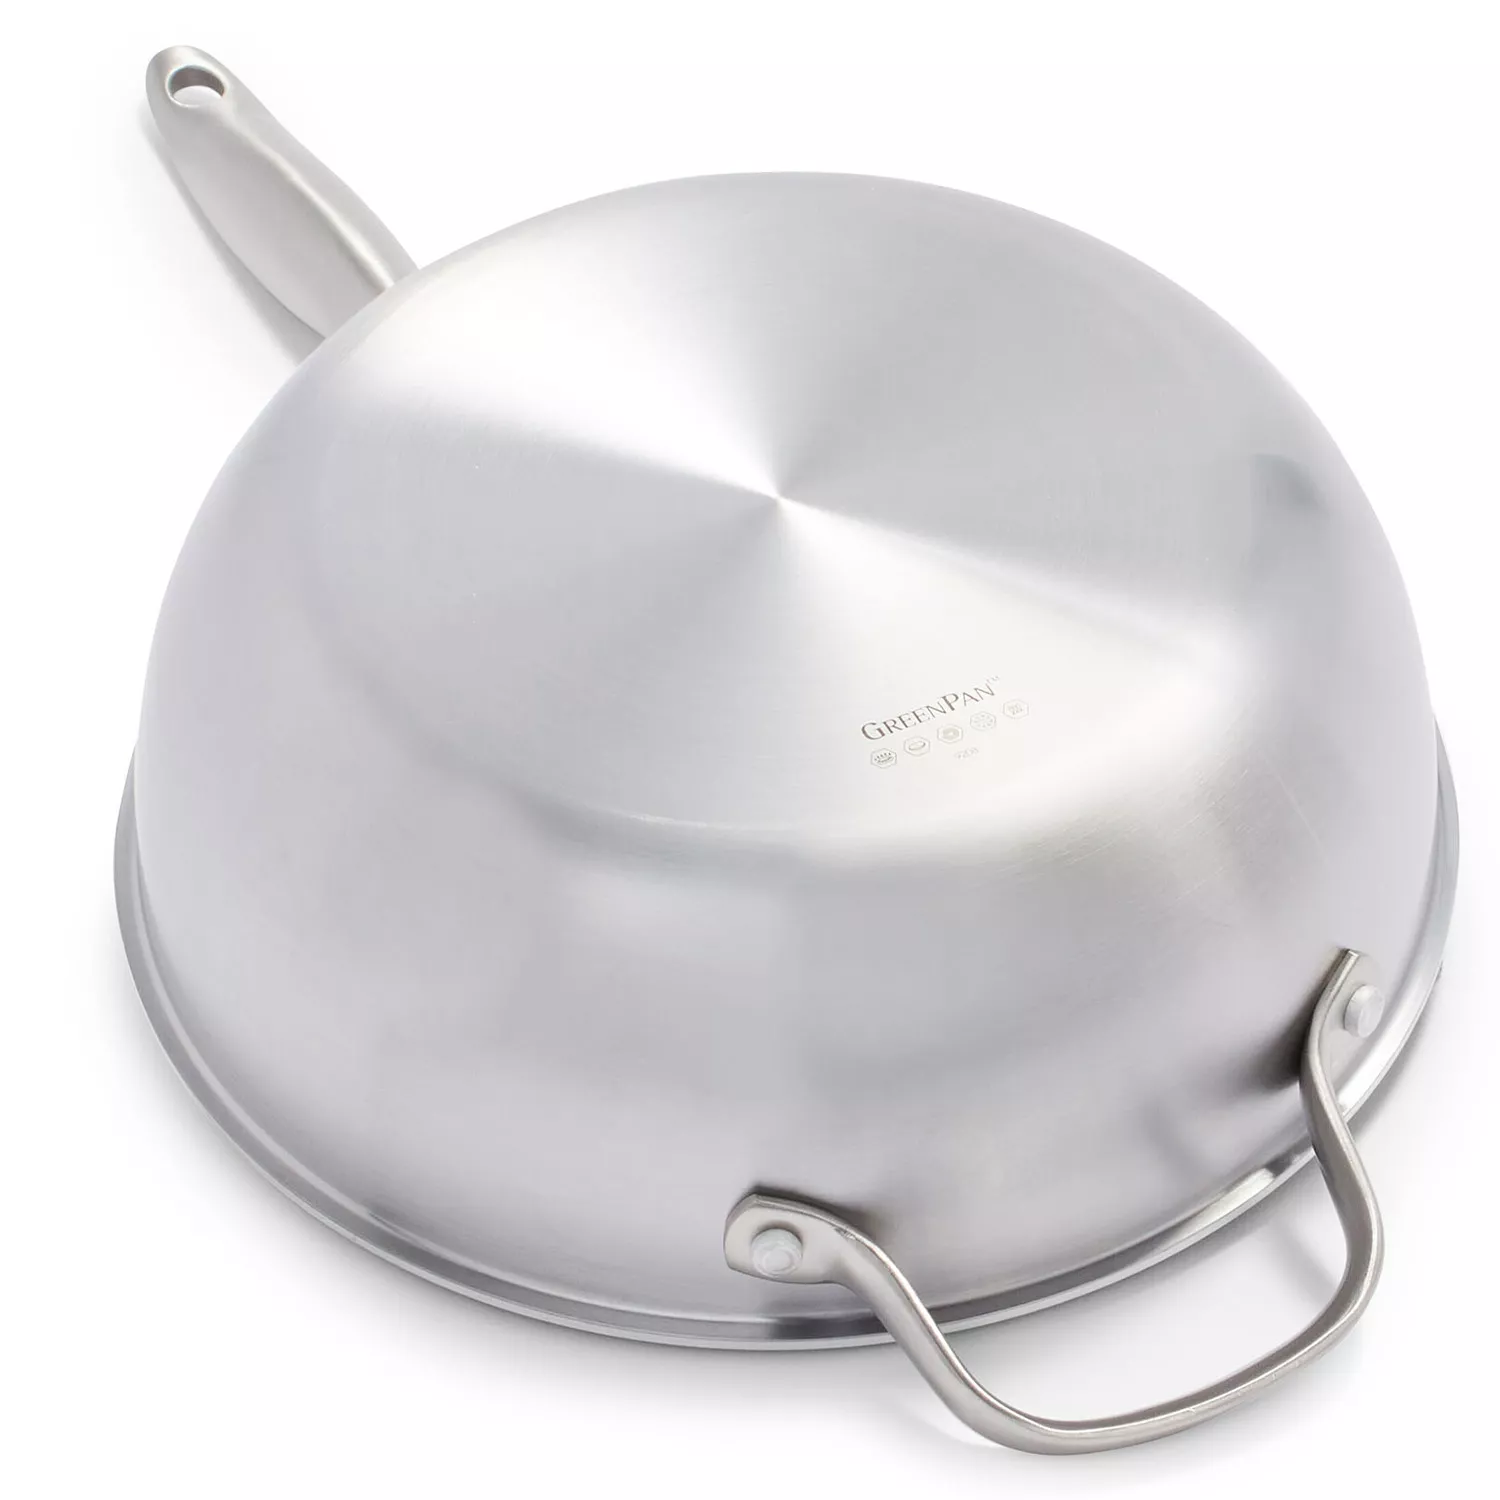 GreenPan Venice Pro Stainless Steel Ceramic Nonstick Chef's Pan with Lid, 3.5 Qt.